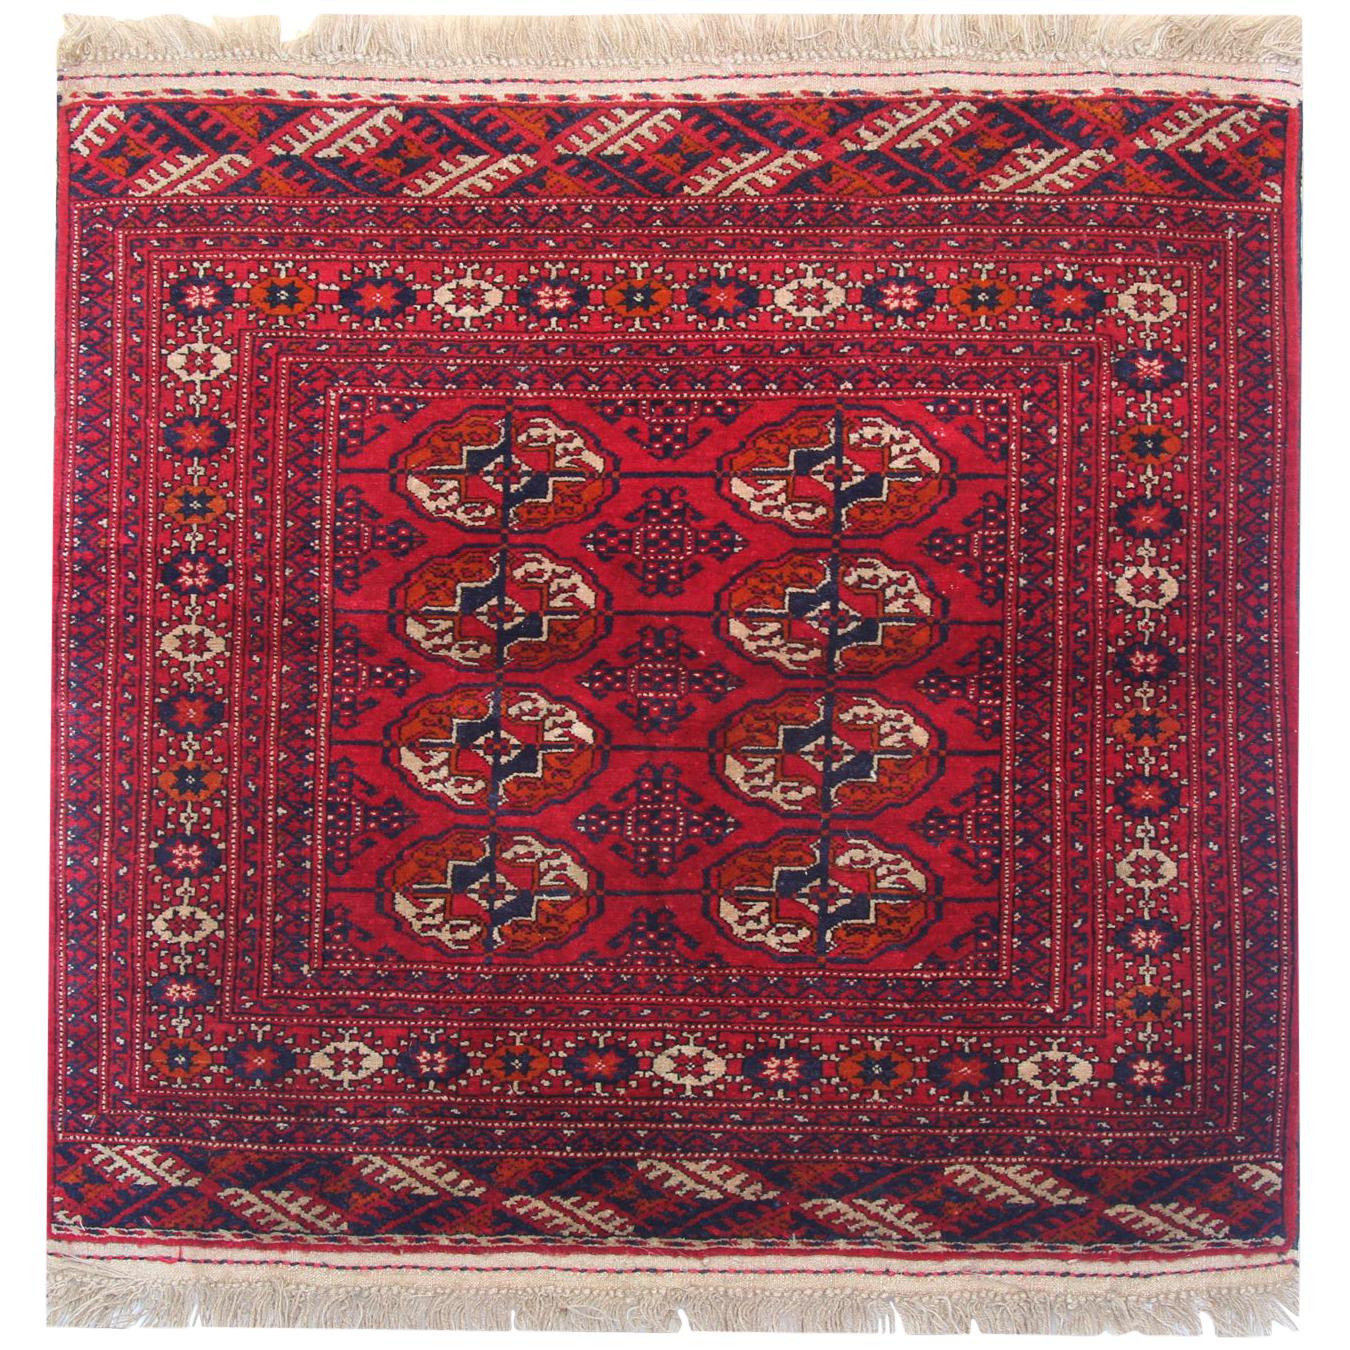 Antique Rugs Turkman Traditional Red Rug, Handmade Wool Area Rug